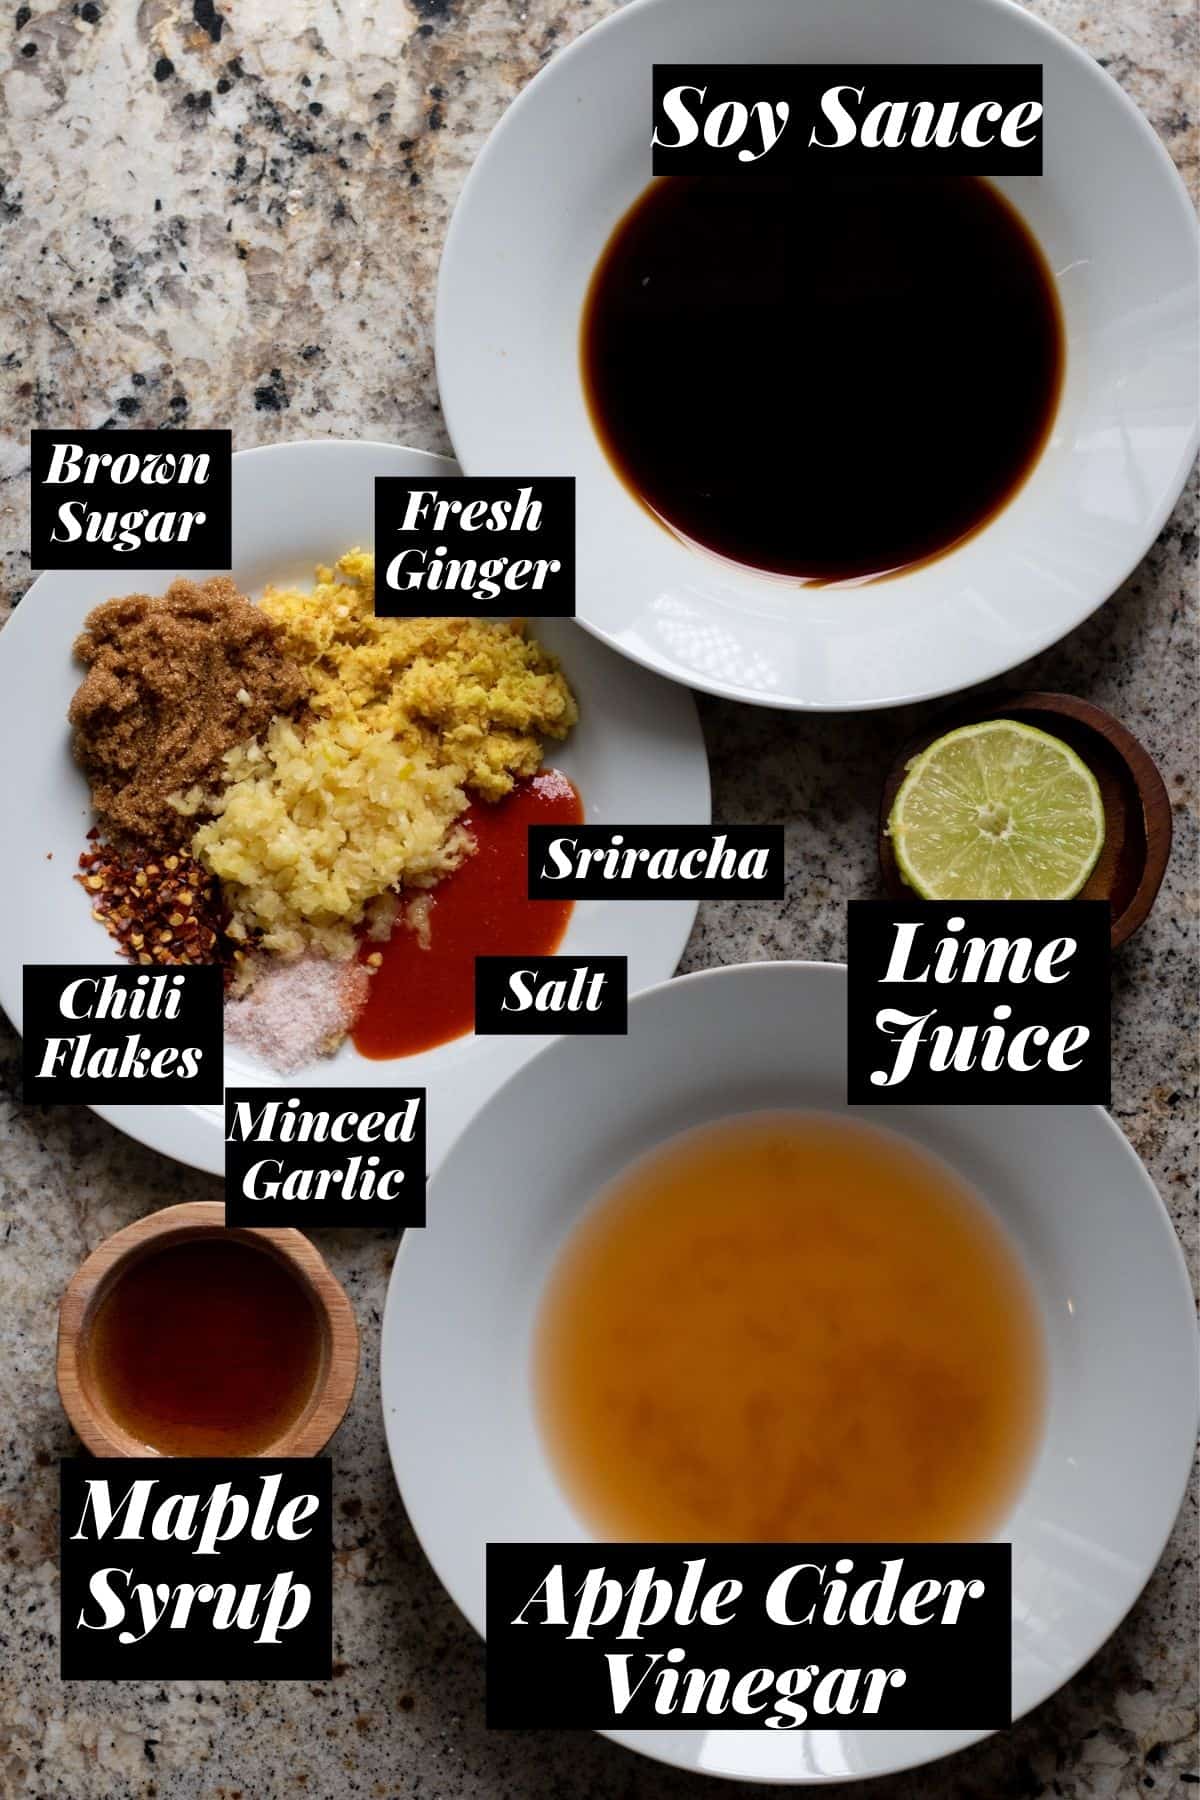 Sauce ingredients measured out into bowls.